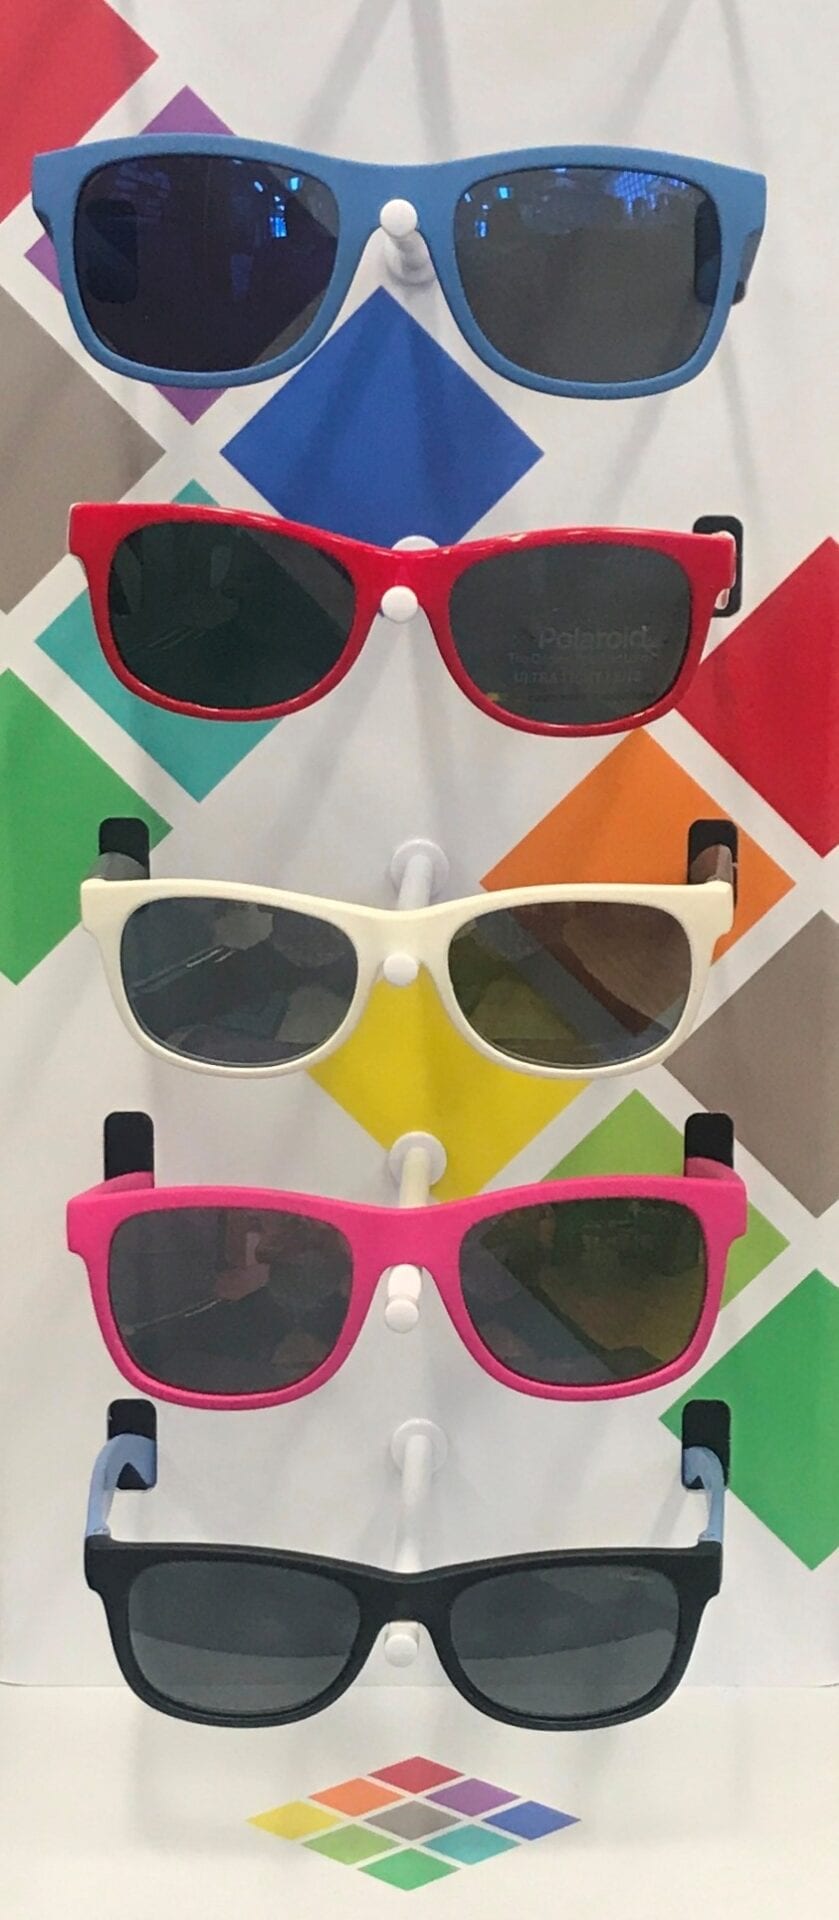 Three pairs of sunglasses are hanging on a wall.